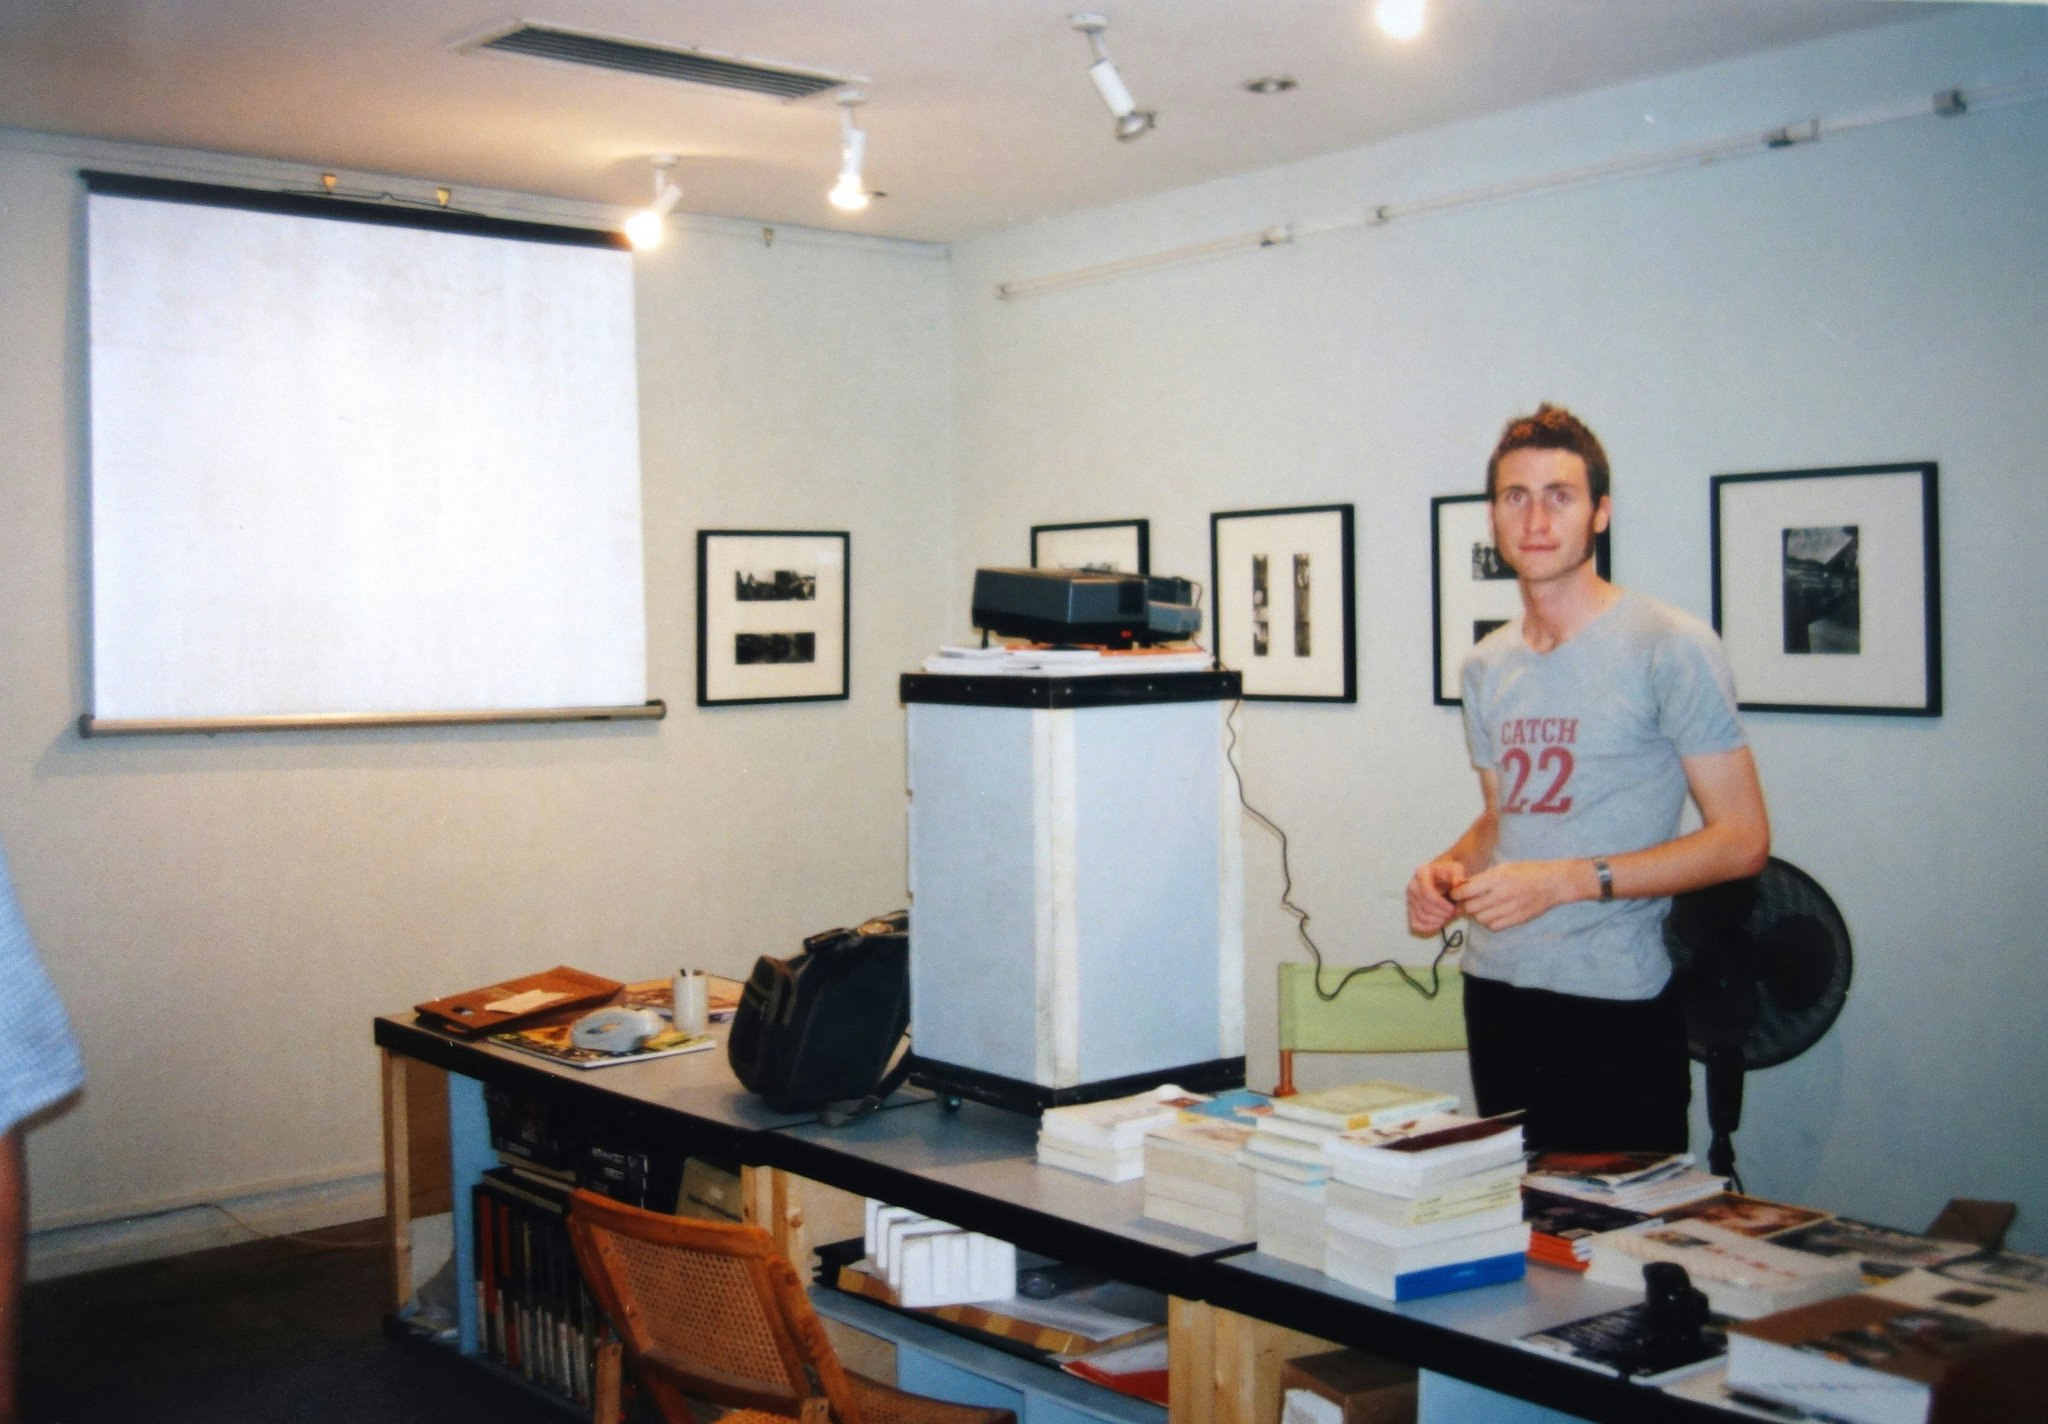 Lucas, a Caucasian male-presenting figure with short brunette hair wearing a grey t-shirt, standing in front of a projector and projector screen.